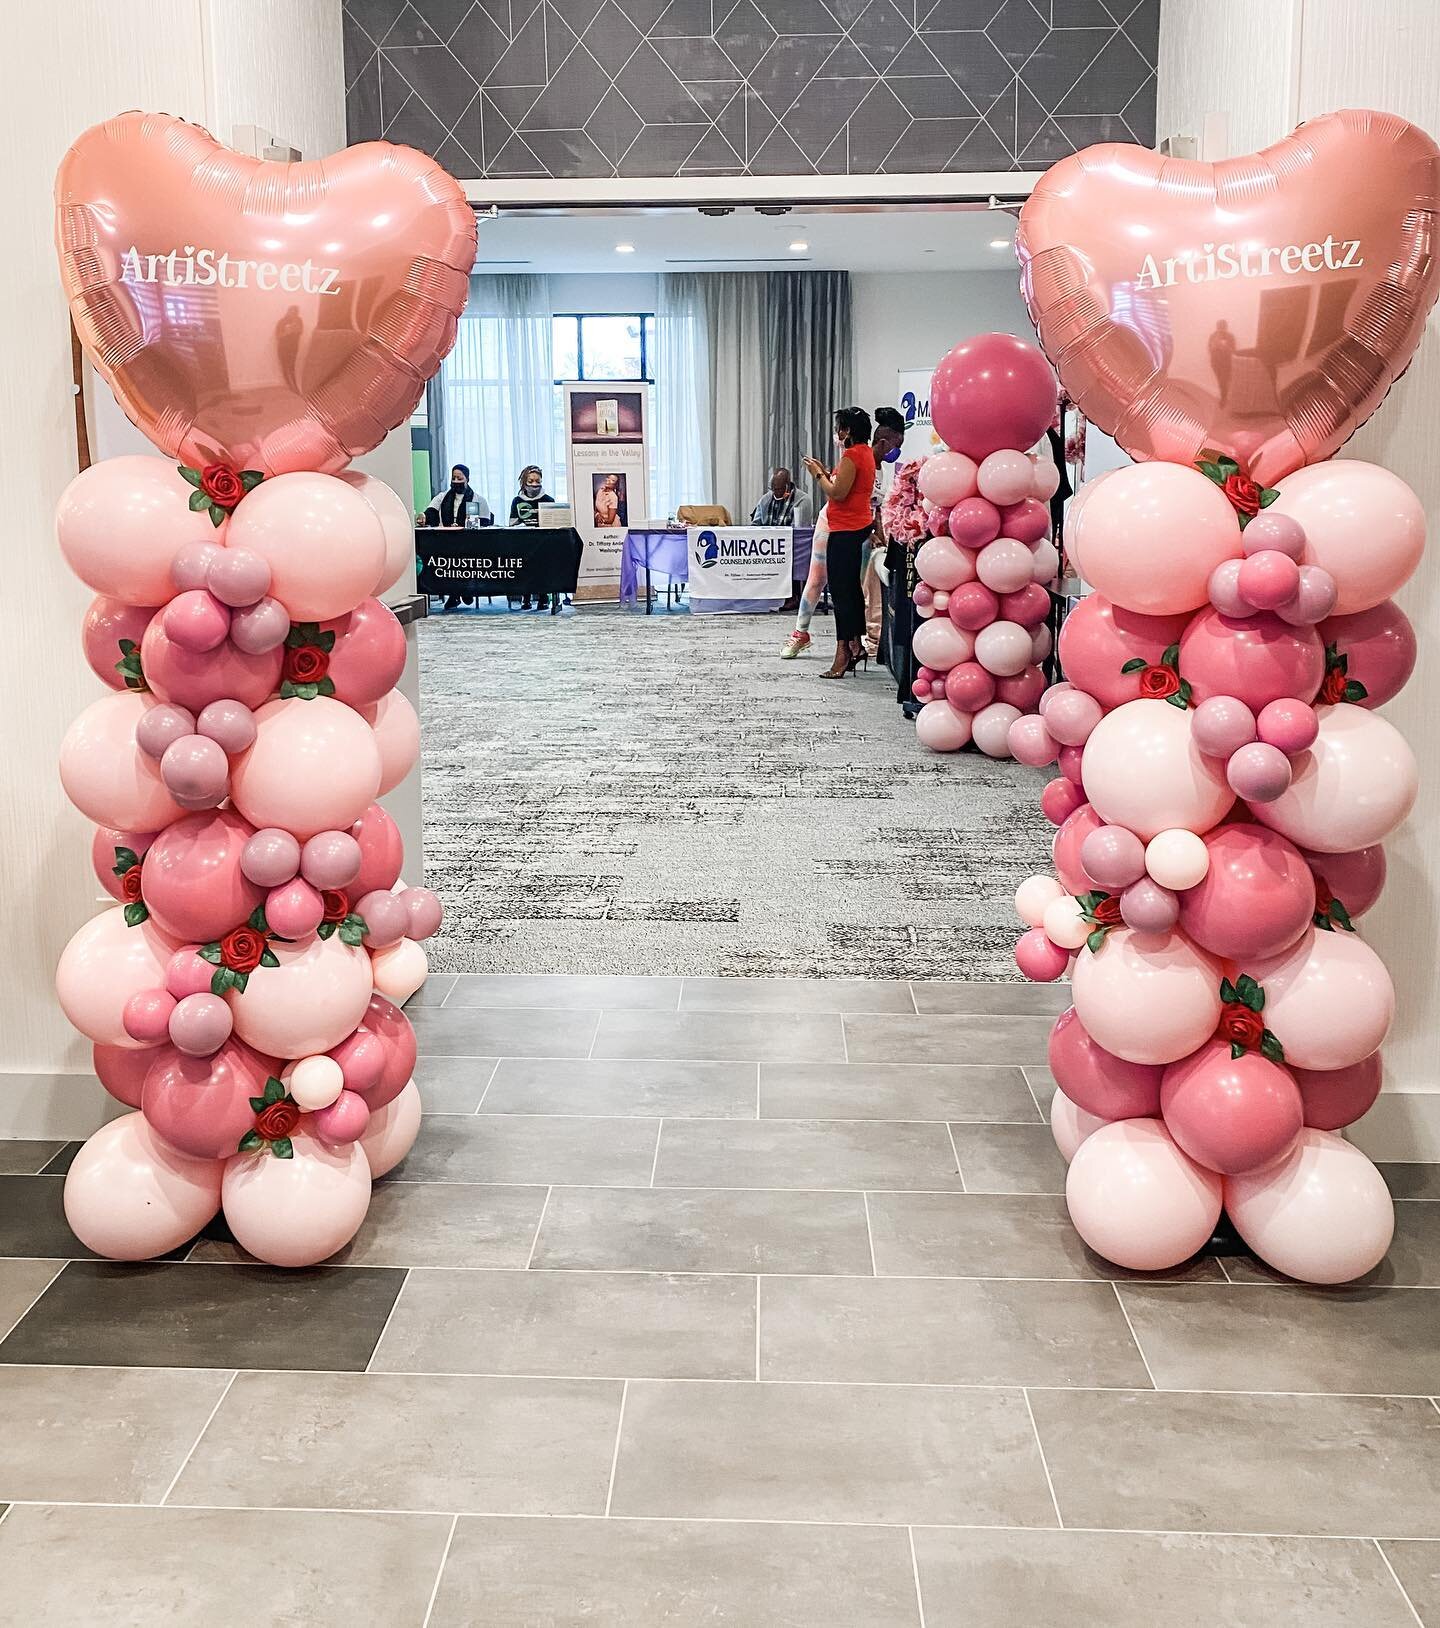 Thank you @artistreetz for choosing Babaloonz Balloons! I think our organic balloon columns added the right touch for your Valentine&rsquo;s Day expo. 
Follow @artistreetz for the deets on all of their upcoming events!🎈🎈

...
....
.....

#mississip